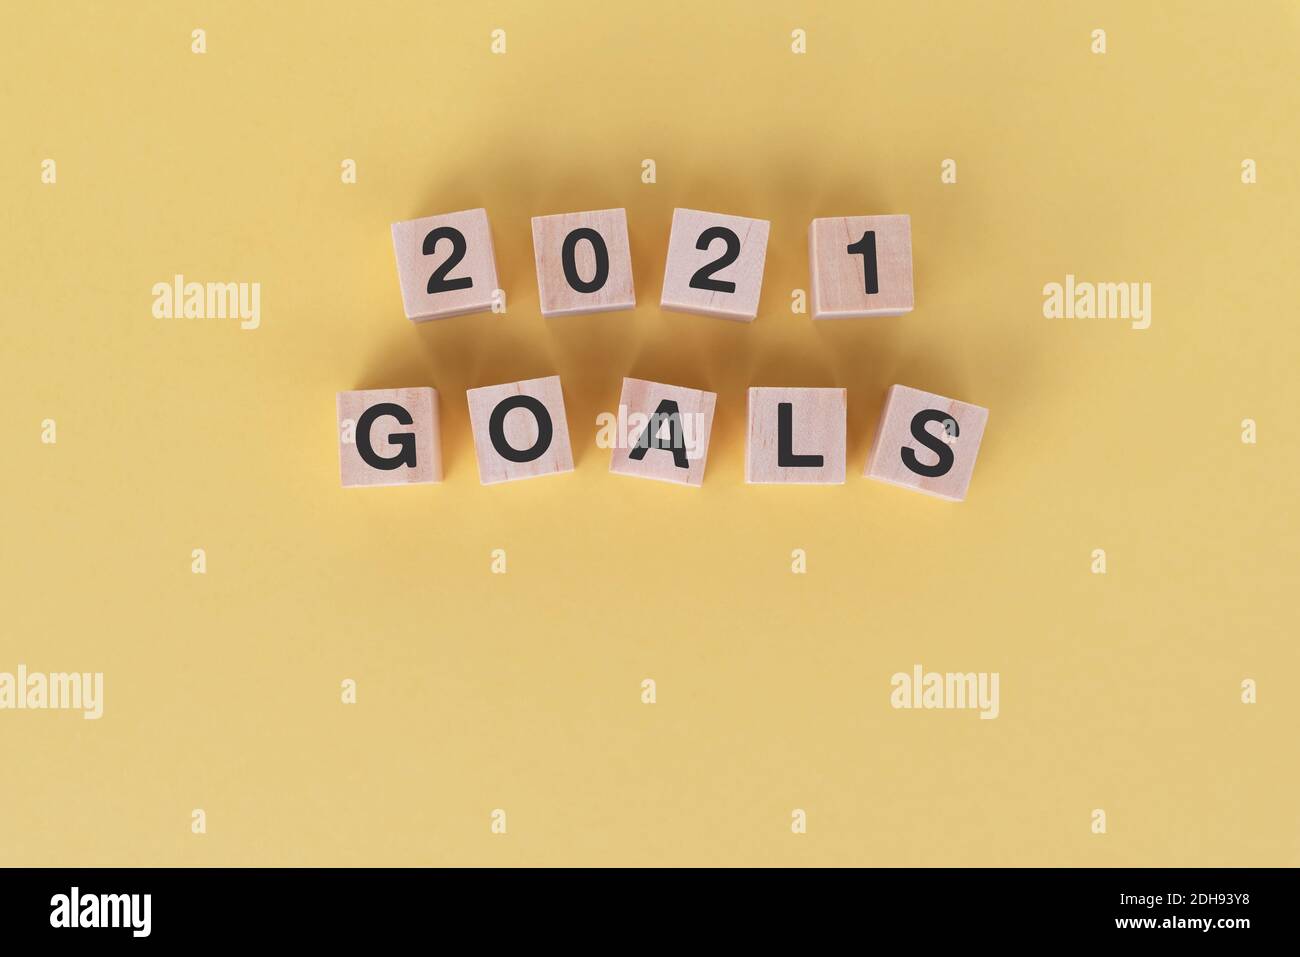 2021 New Year goals concept yellow background Stock Photo